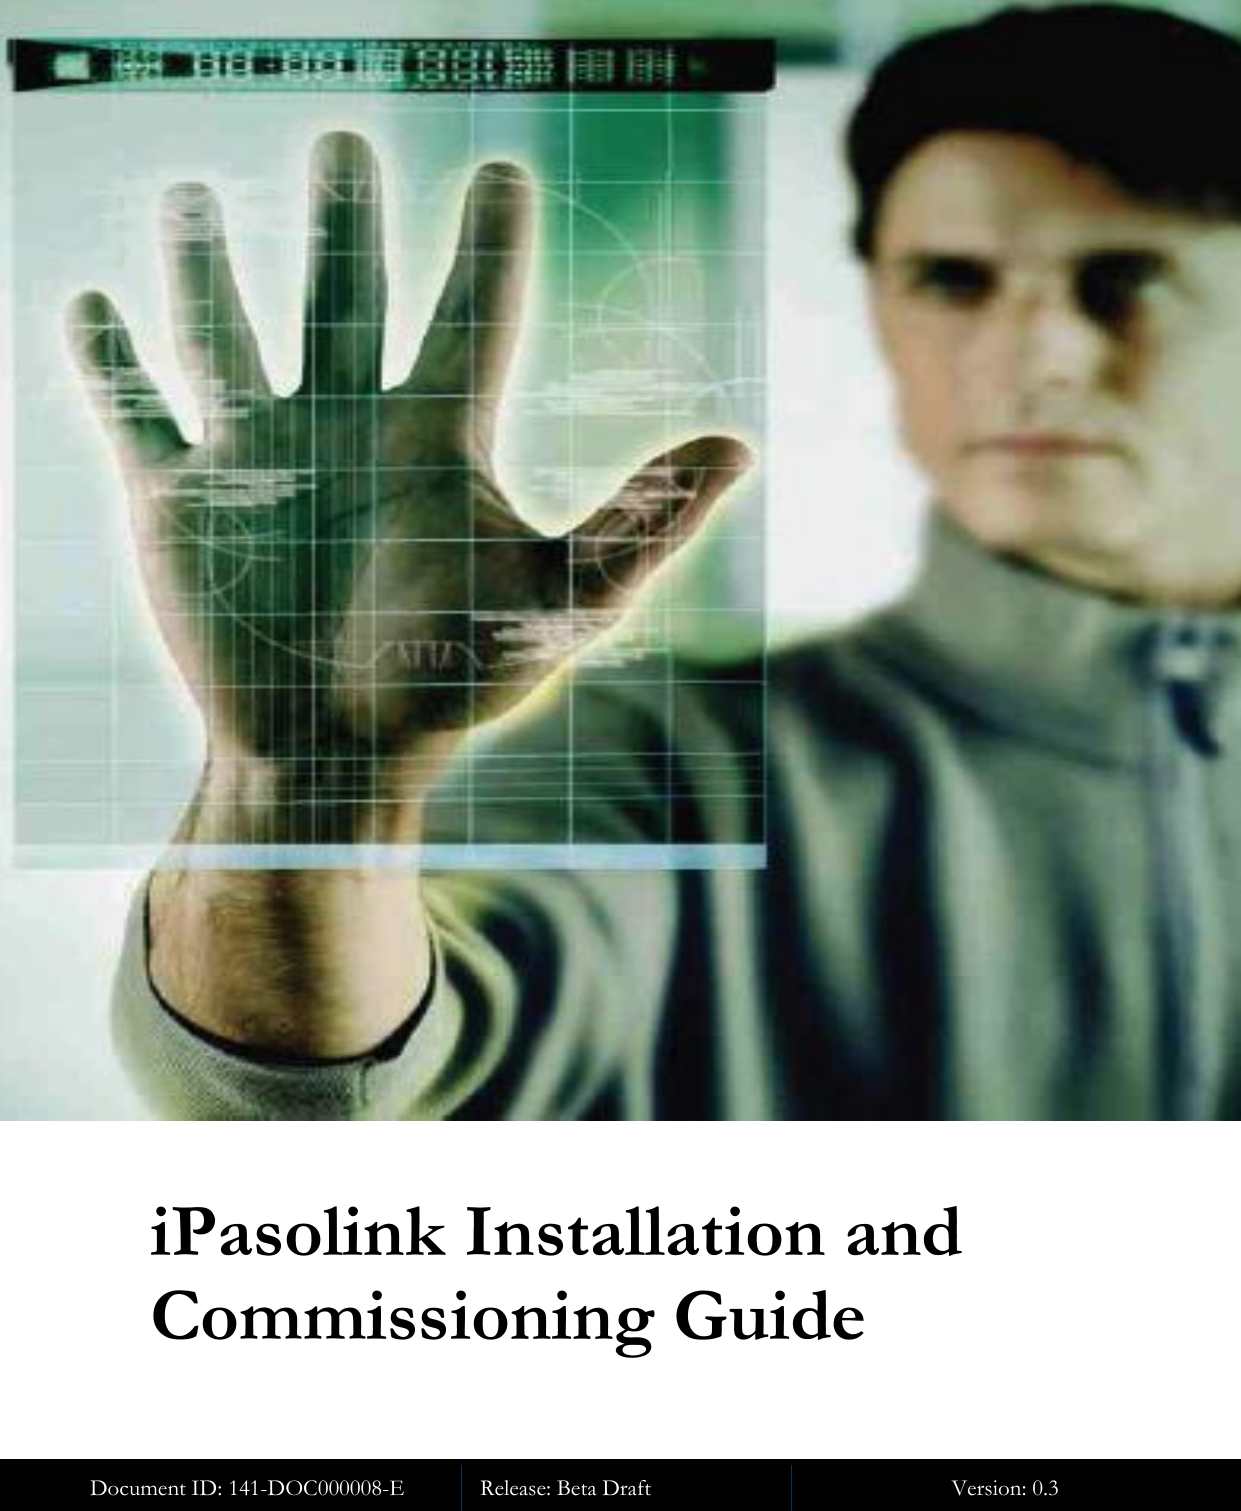  Document ID: 141-DOC000008-E iPasolink Installation and Commissioning Guide Release: Beta Draft Version: 0.3   